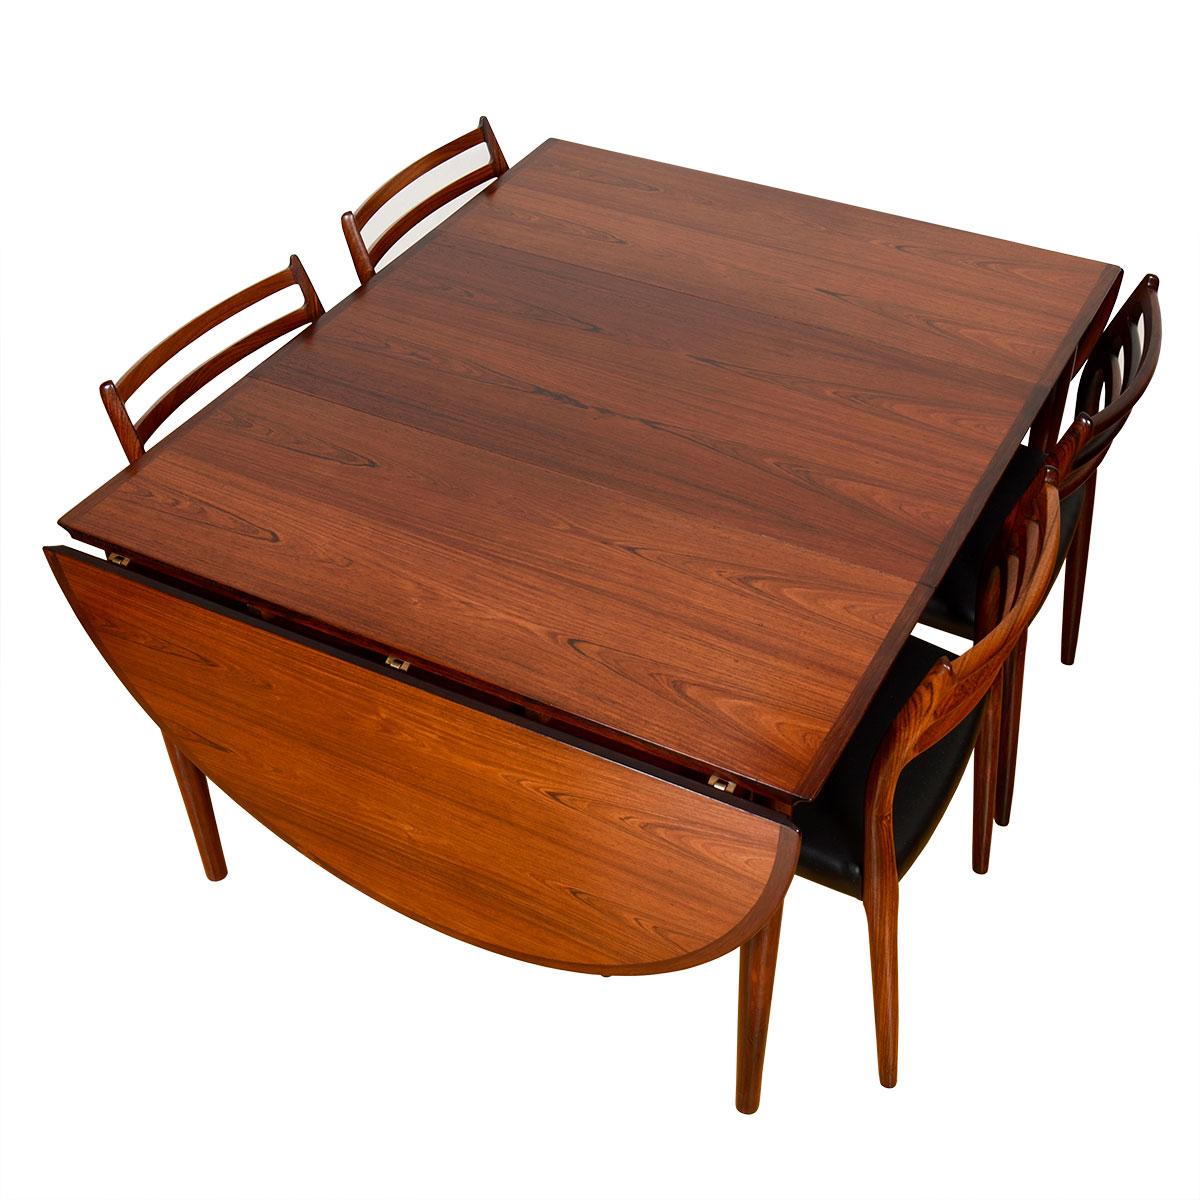 Vodder Danish Rosewood Dining Table with Removable Drop Leaves + Middle Leaf In Good Condition For Sale In Kensington, MD